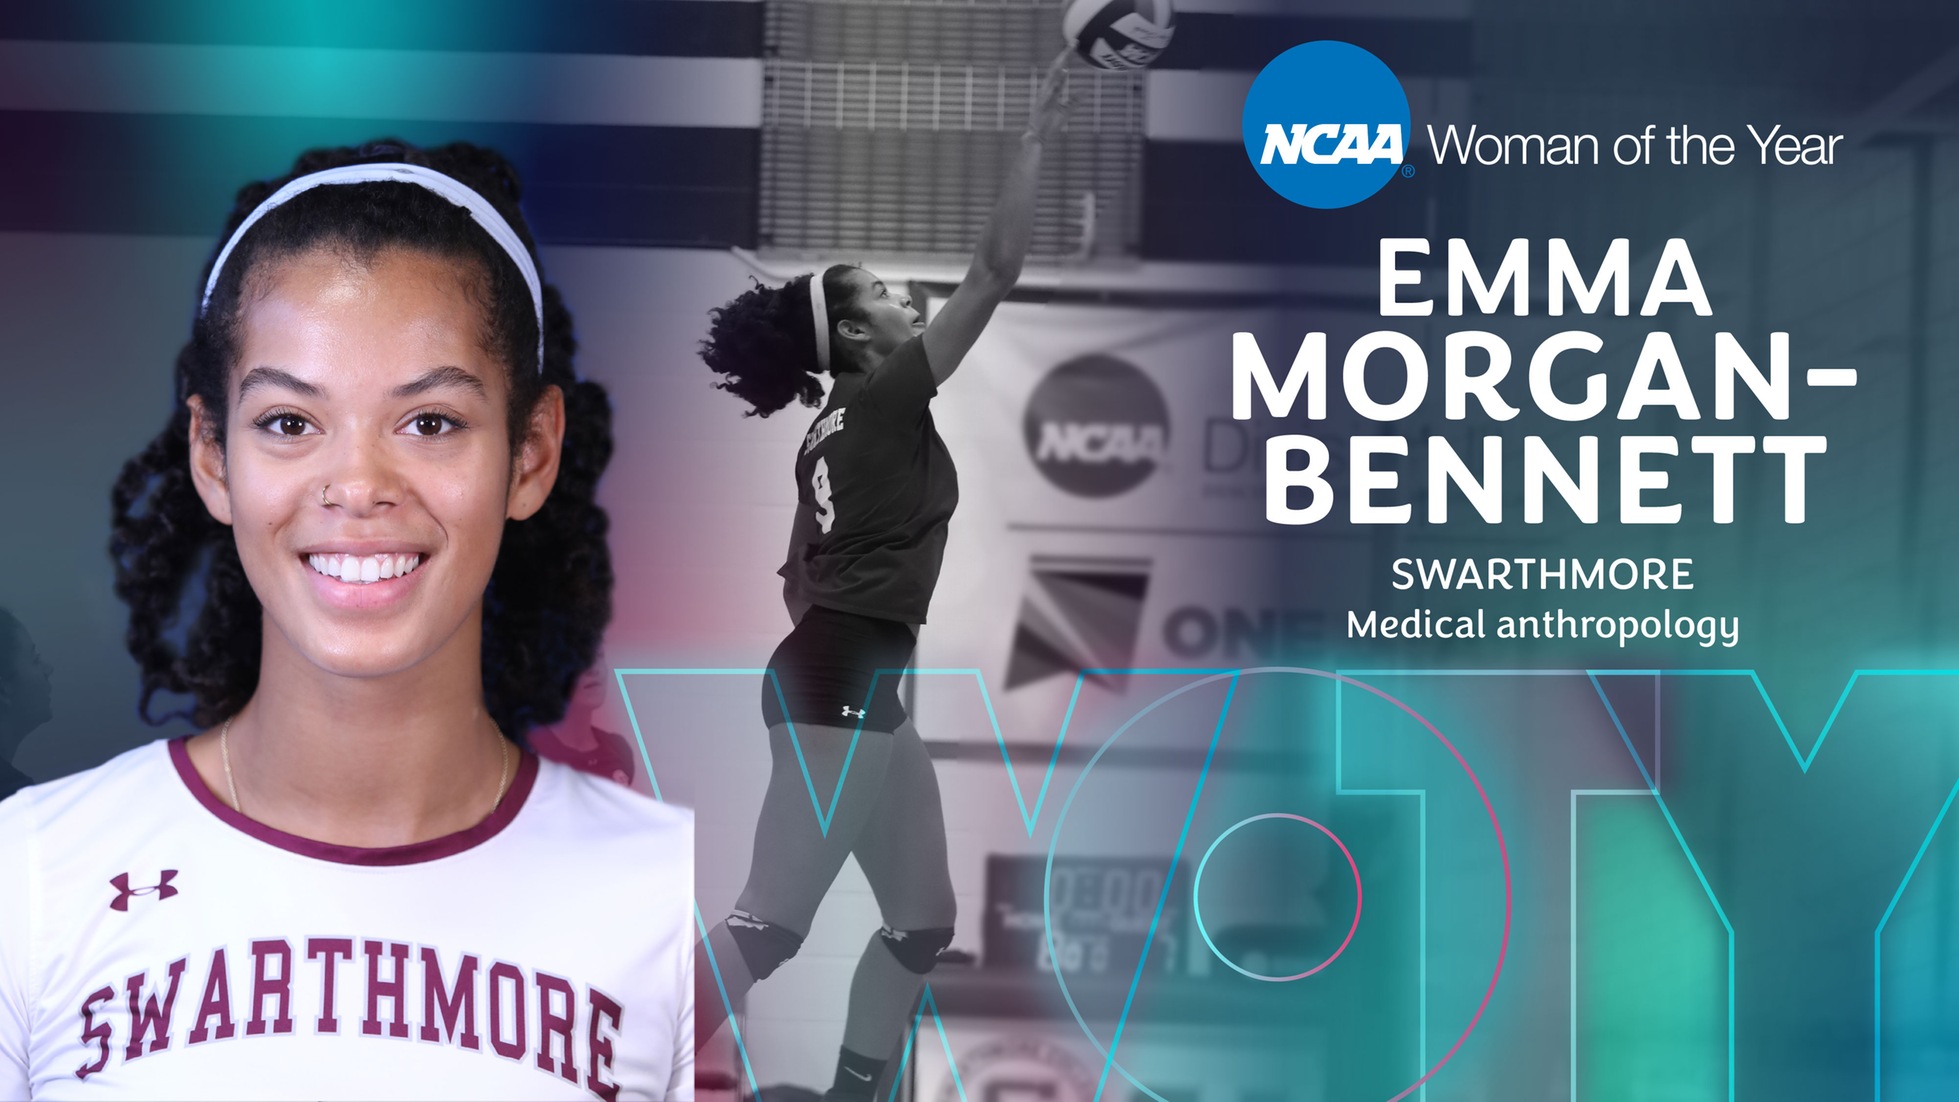 Swarthmore's Morgan-Bennett Named Top 30 NCAA Woman of the Year Honoree